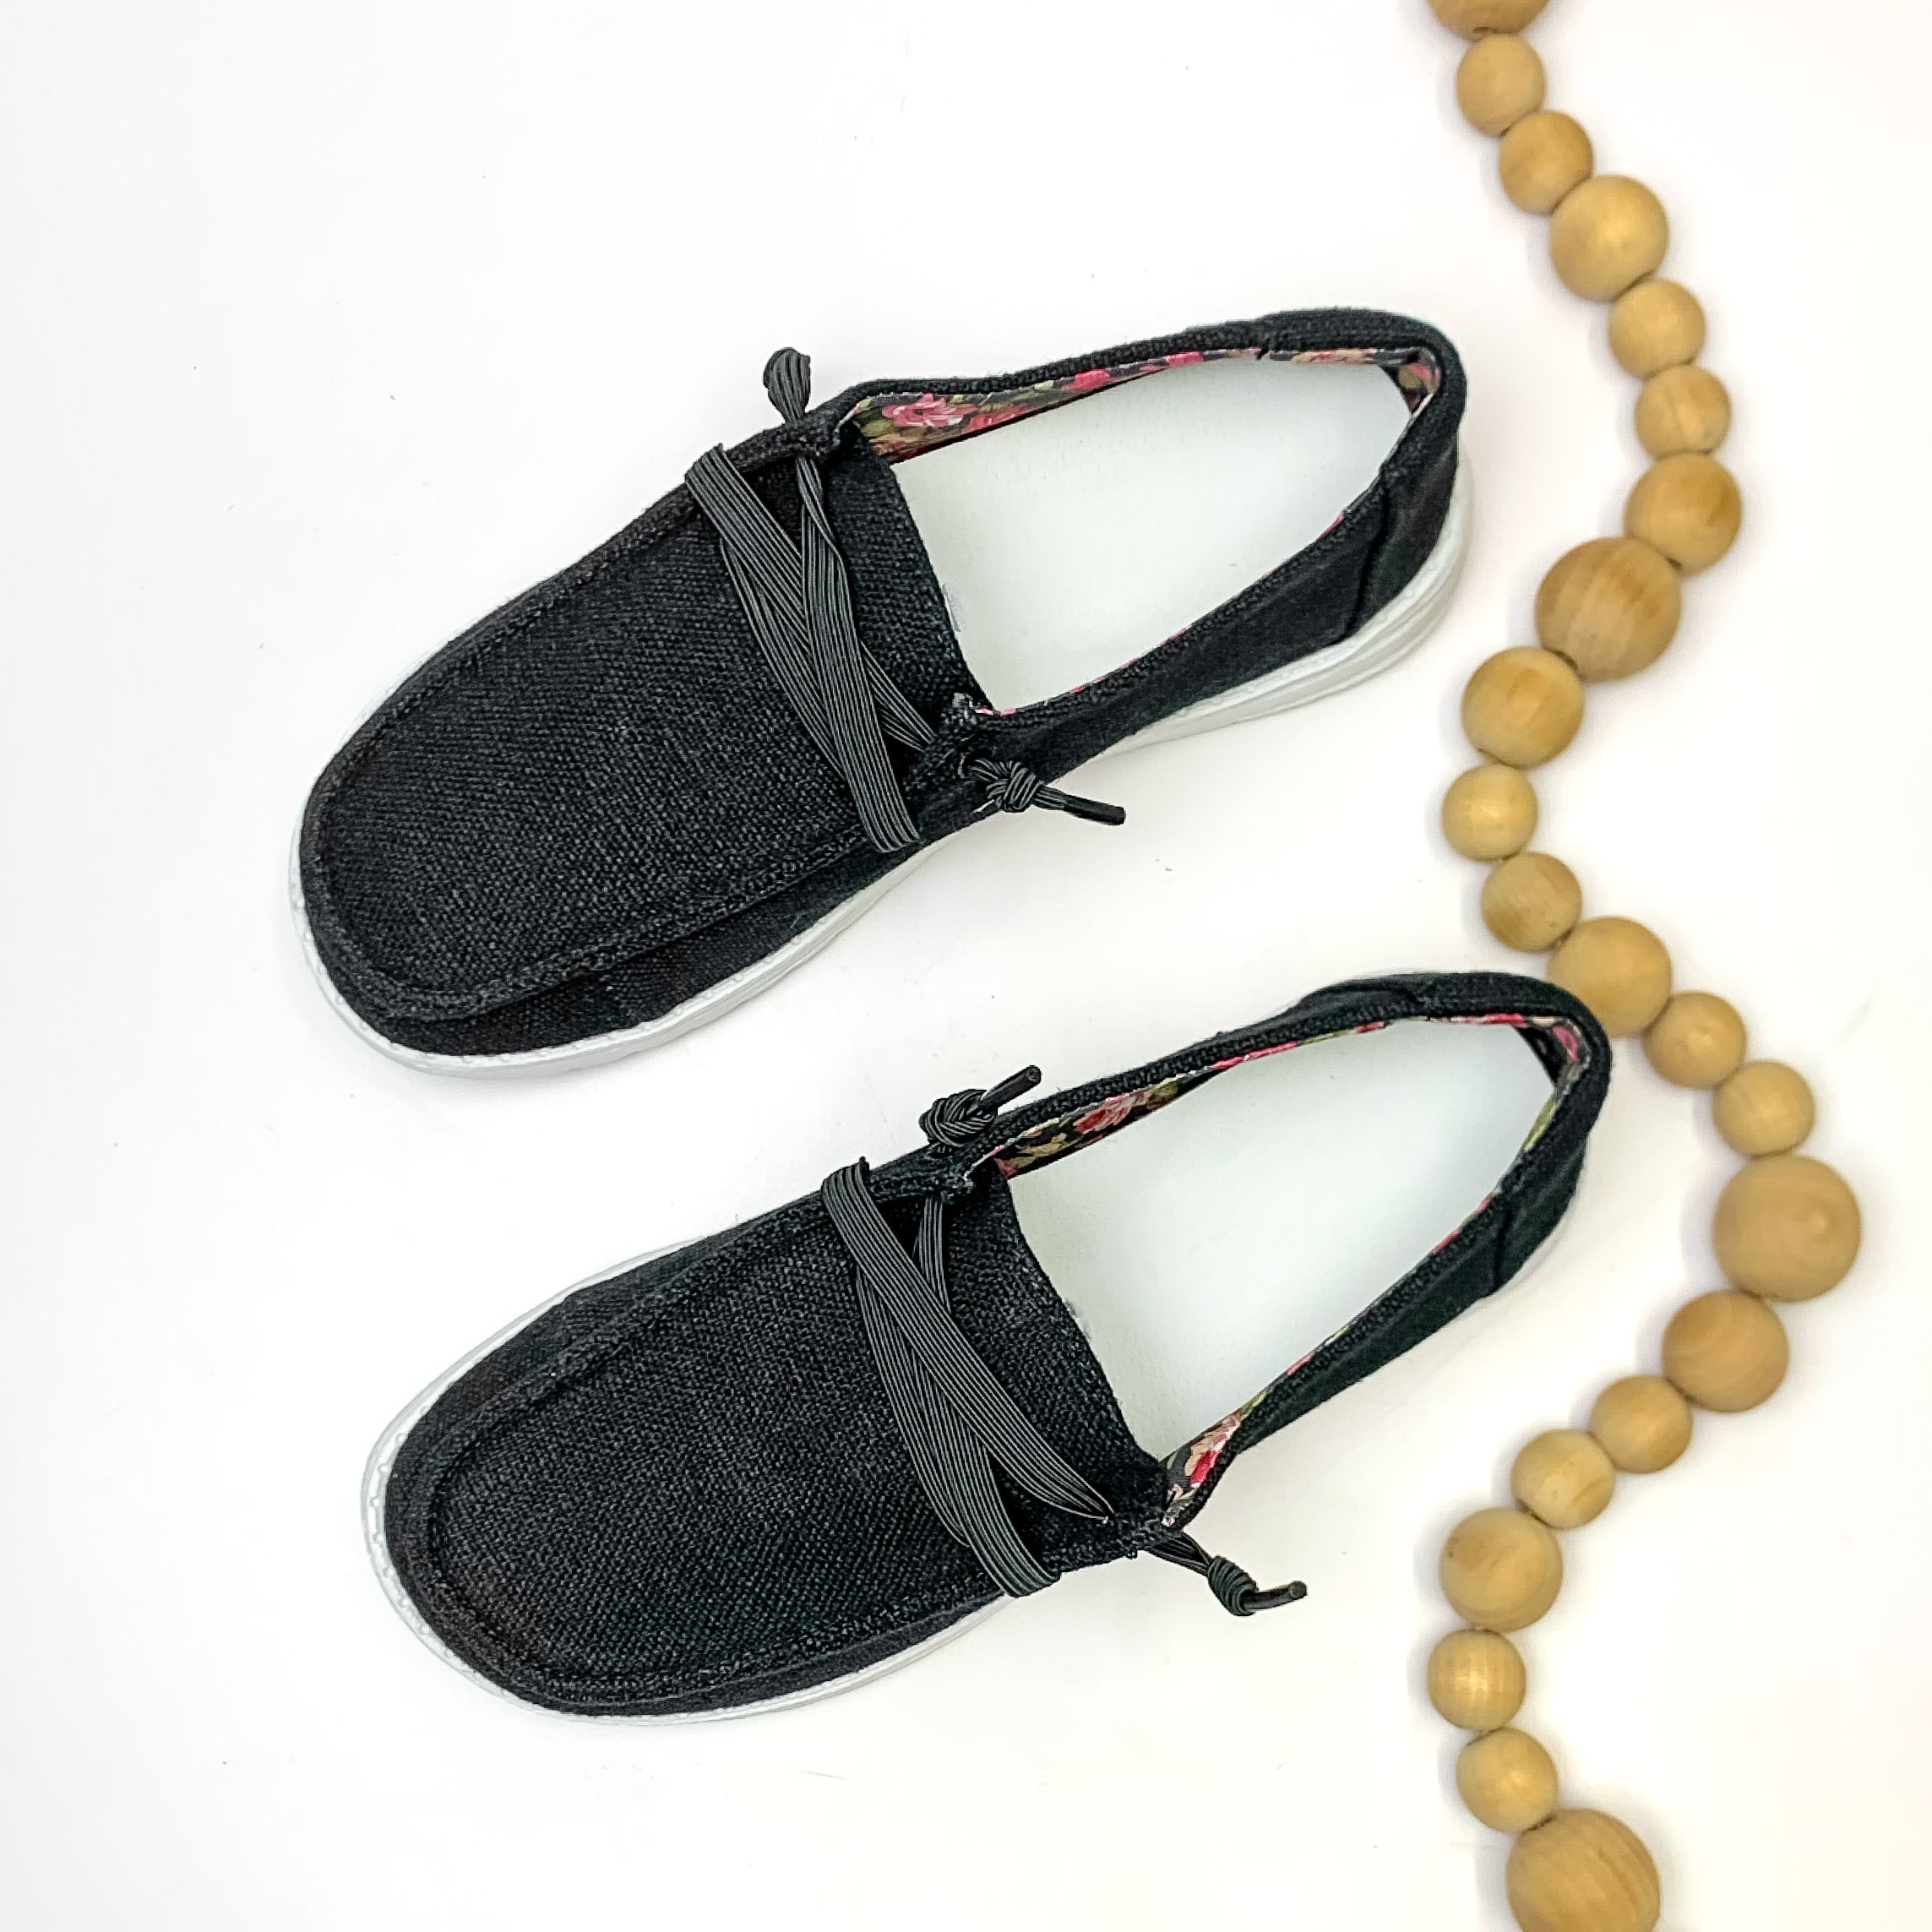 Very G | Have To Run Slip On Loafers with Black Laces in Black Canvas - Giddy Up Glamour Boutique